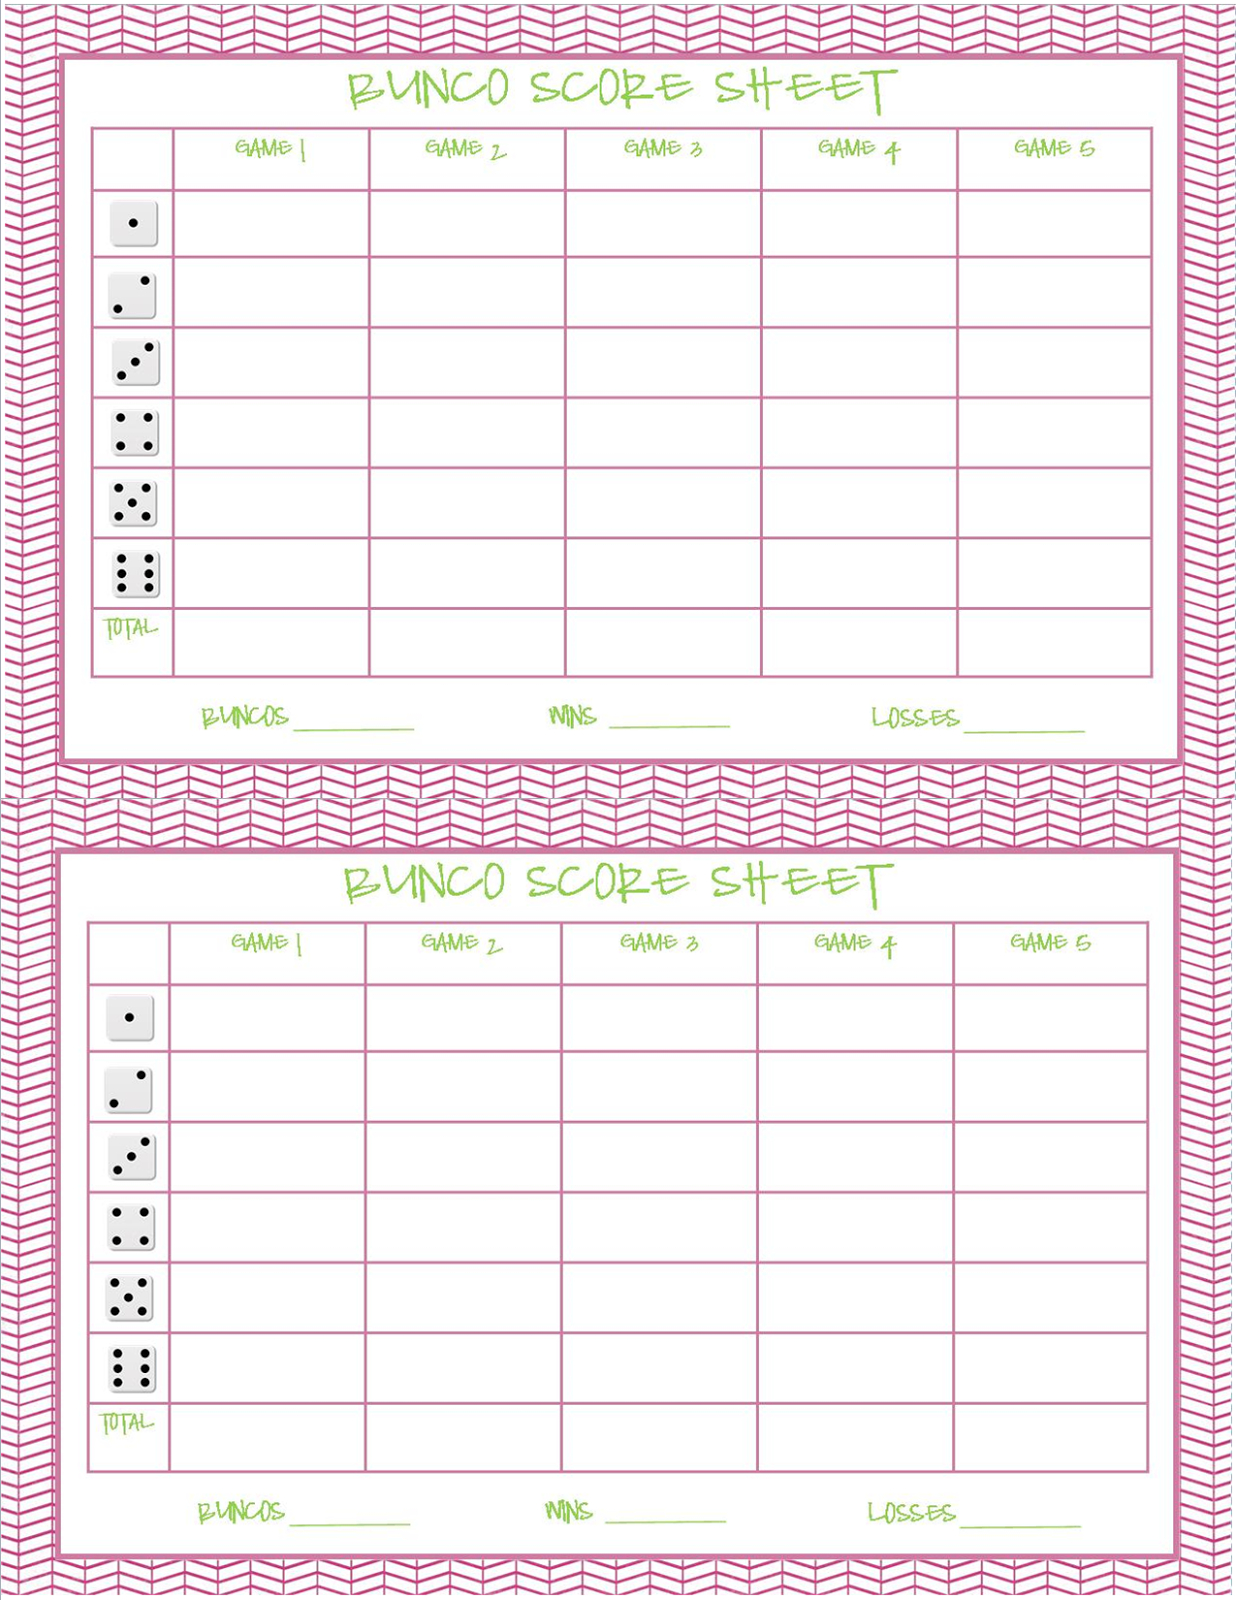 Free Printable Bunco Score Sheets Only | Feel Free To Print It Out - Free Printable Bunco Score Sheets